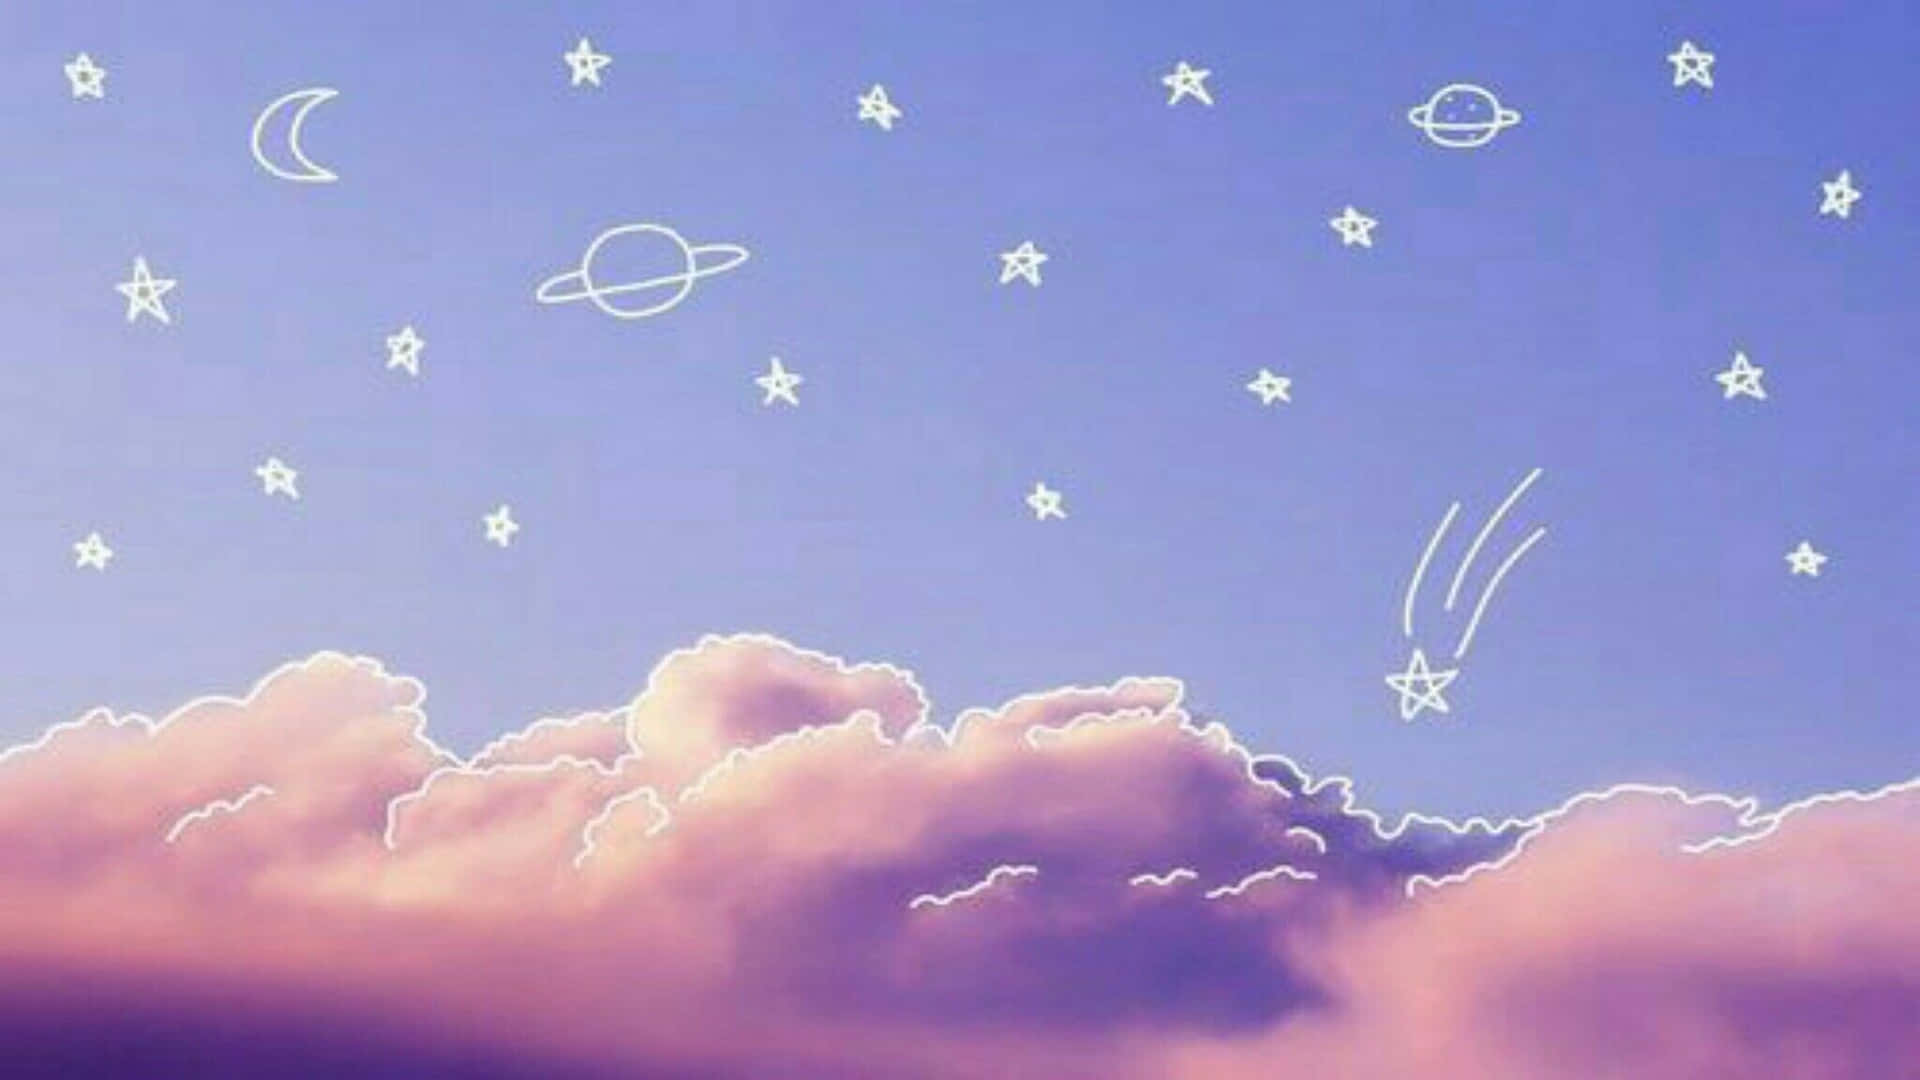 2048x1152 Aesthetic Hand Drawn Stars And Cloud Wallpaper